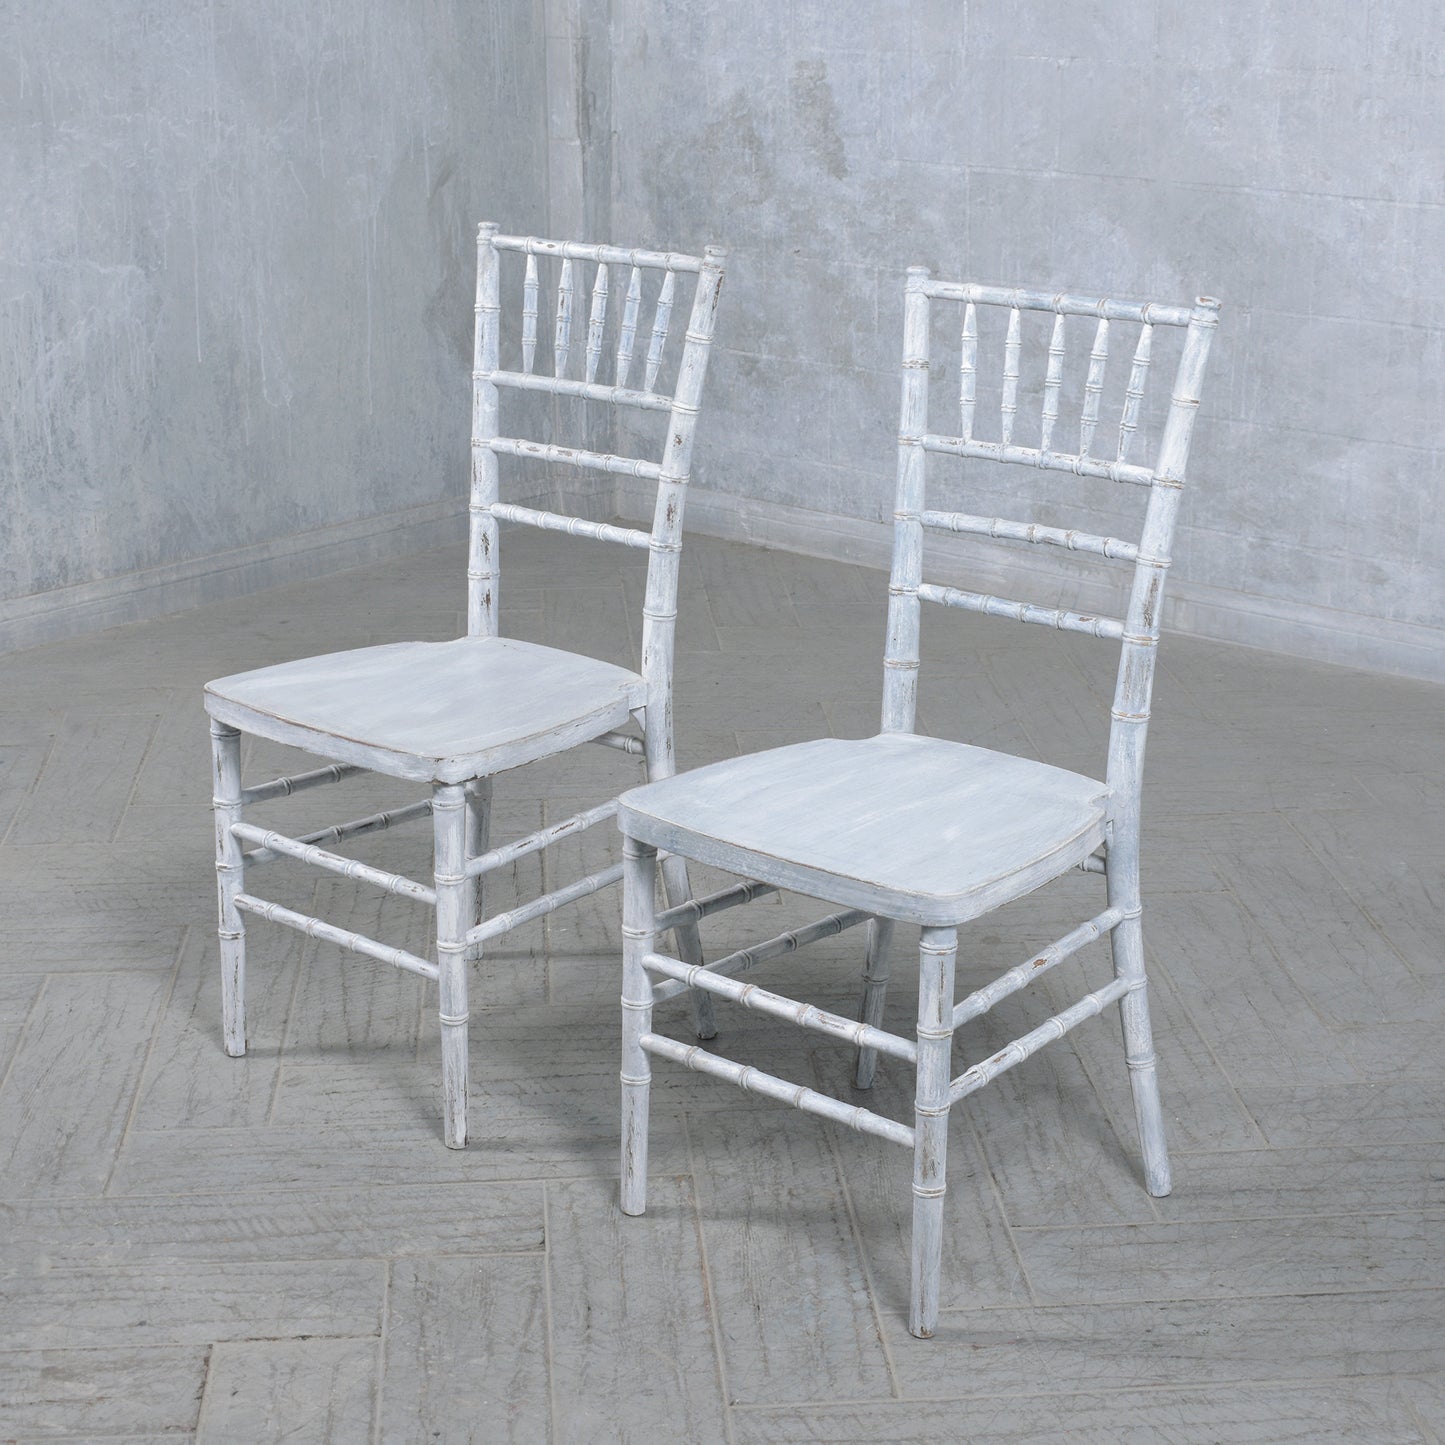 Vintage Chinese Chippendale Dining Chairs: Faux Bamboo Elegance Restored